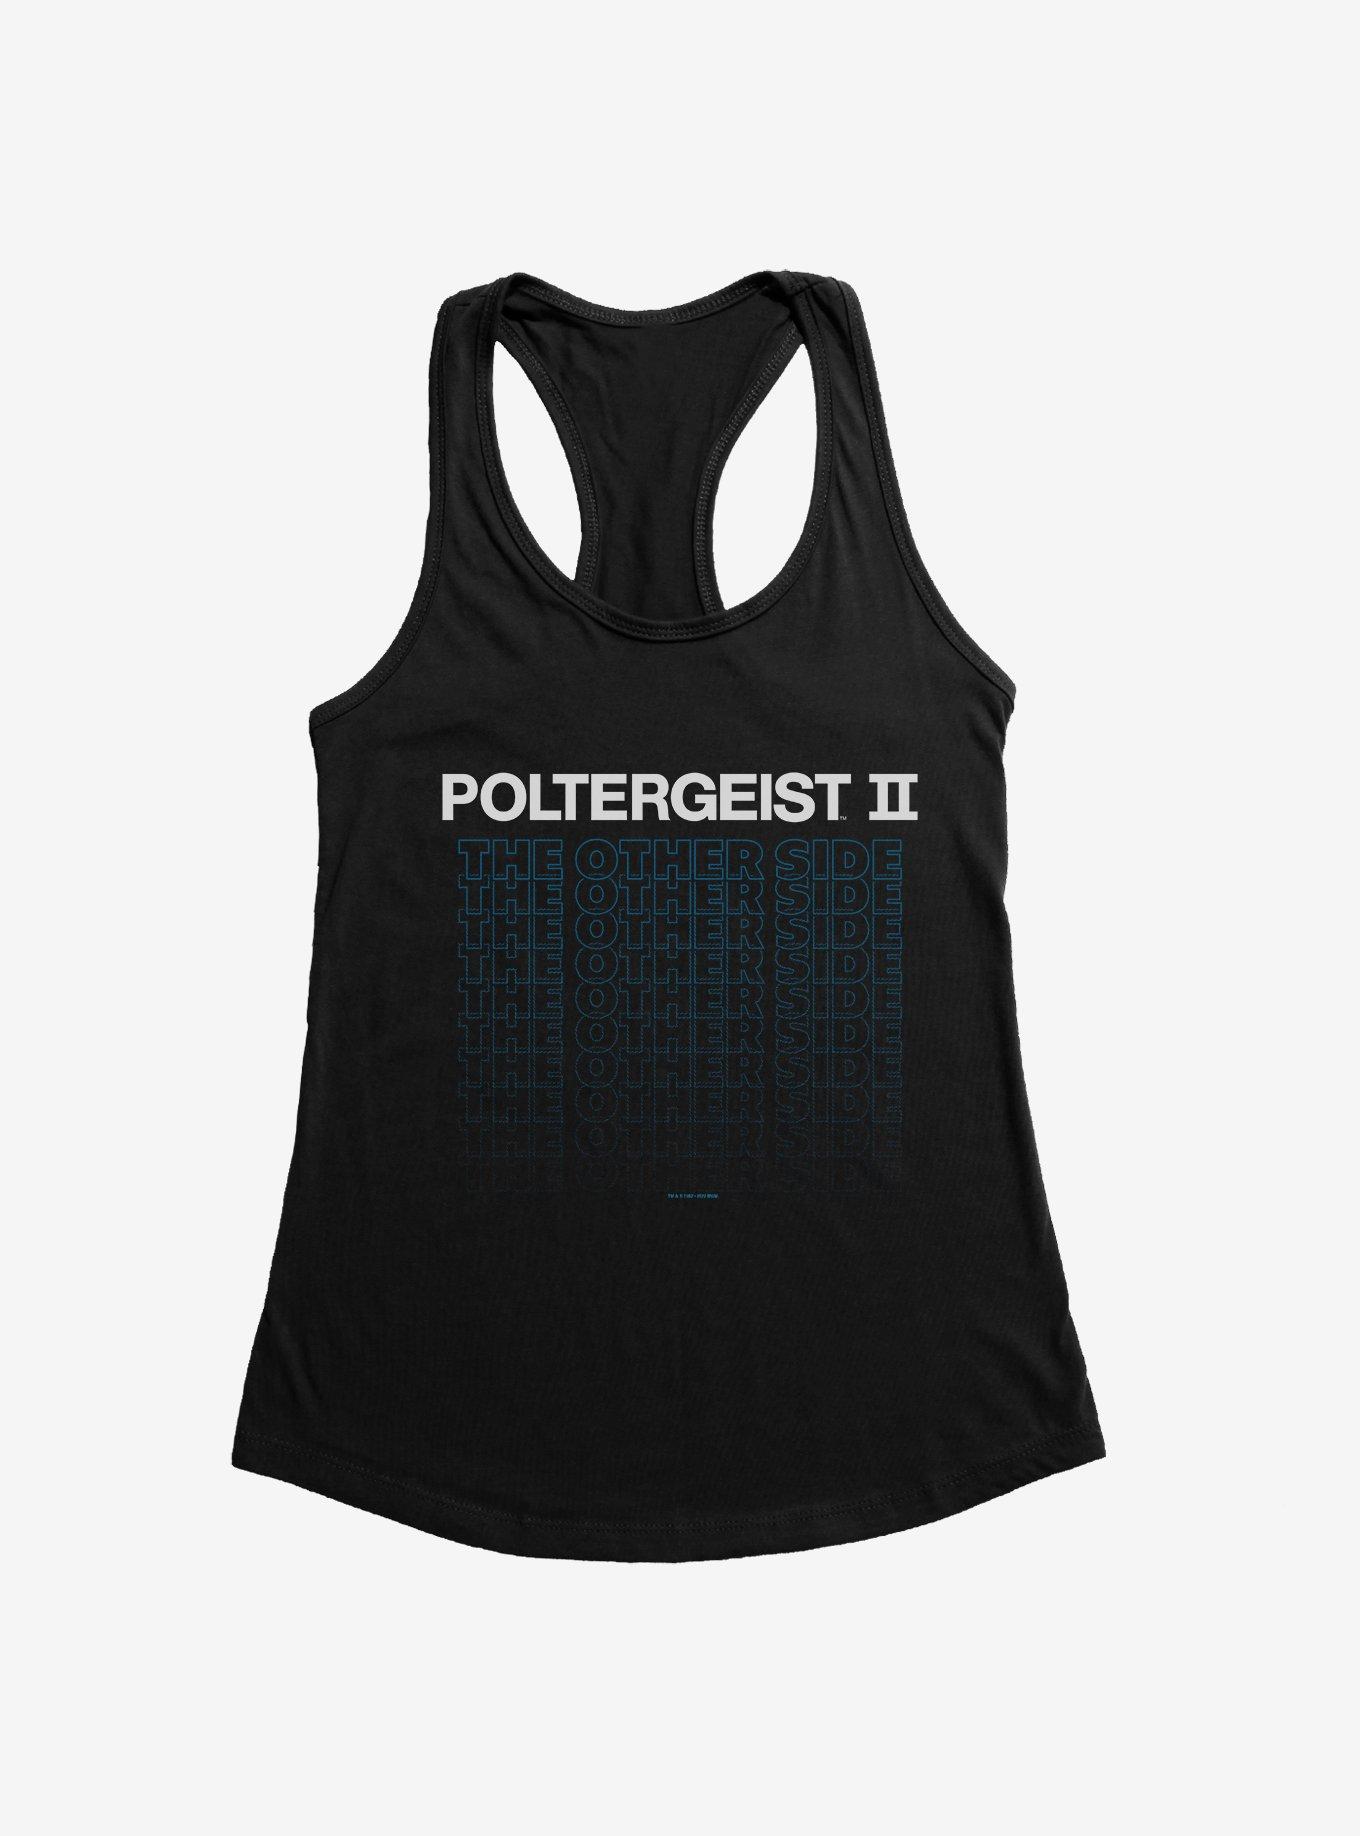 Poltergeist II The Other Side Womens Tank Top, BLACK, hi-res